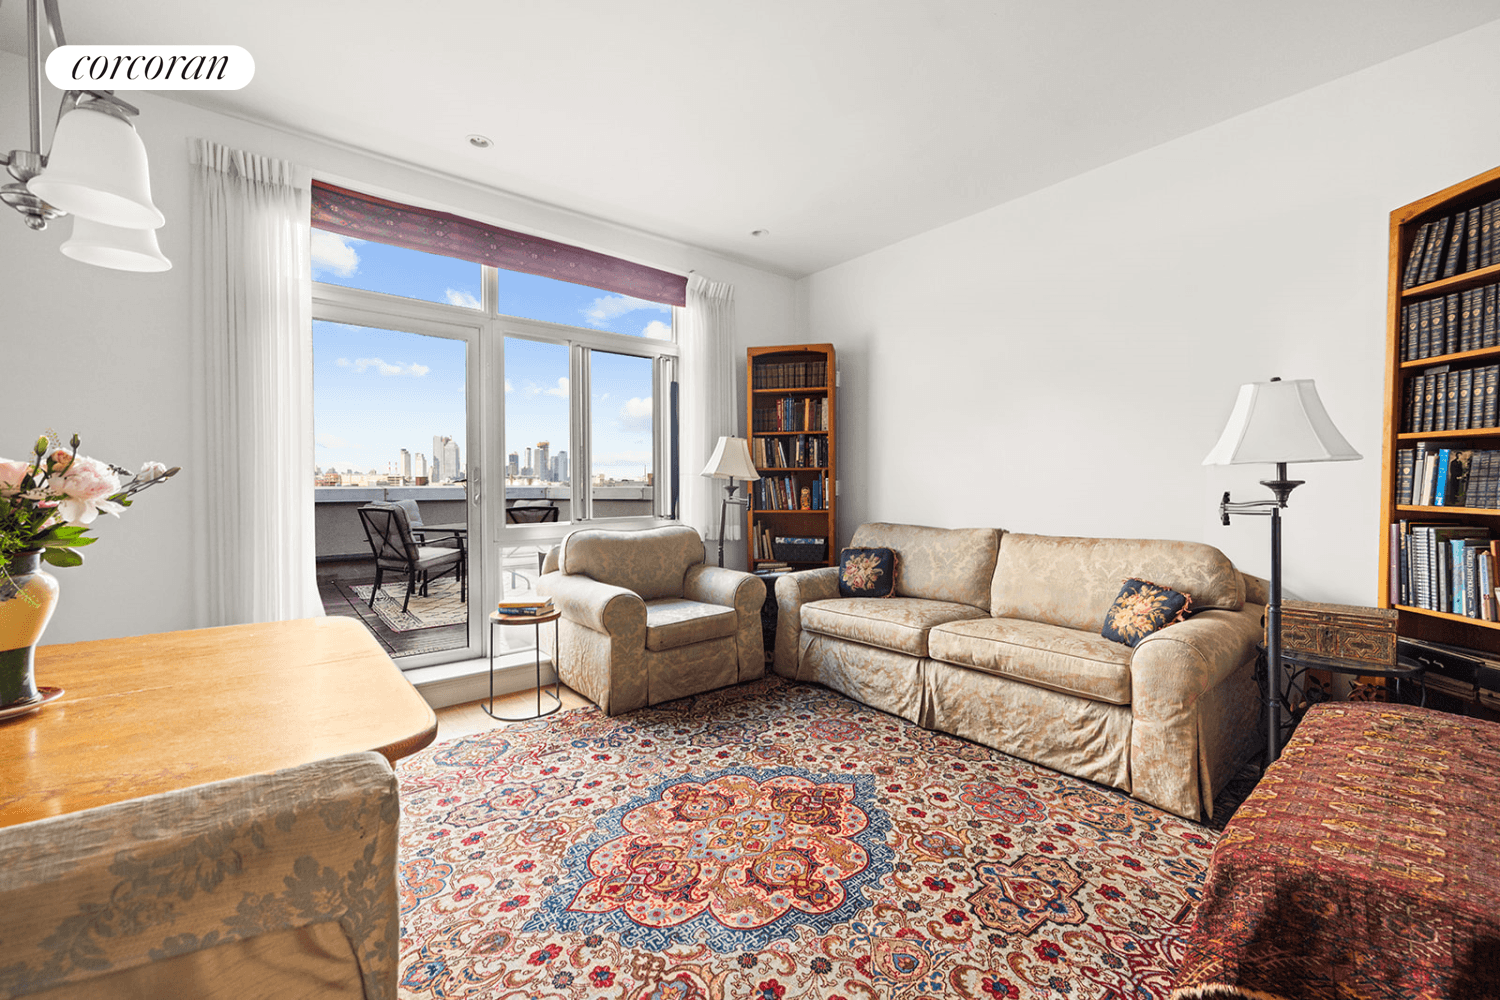 Welcome to your top floor oasis offering outdoor living at its finest with a spacious private terrace and sweeping views of the Midtown skyline and the iconic Empire State Building.